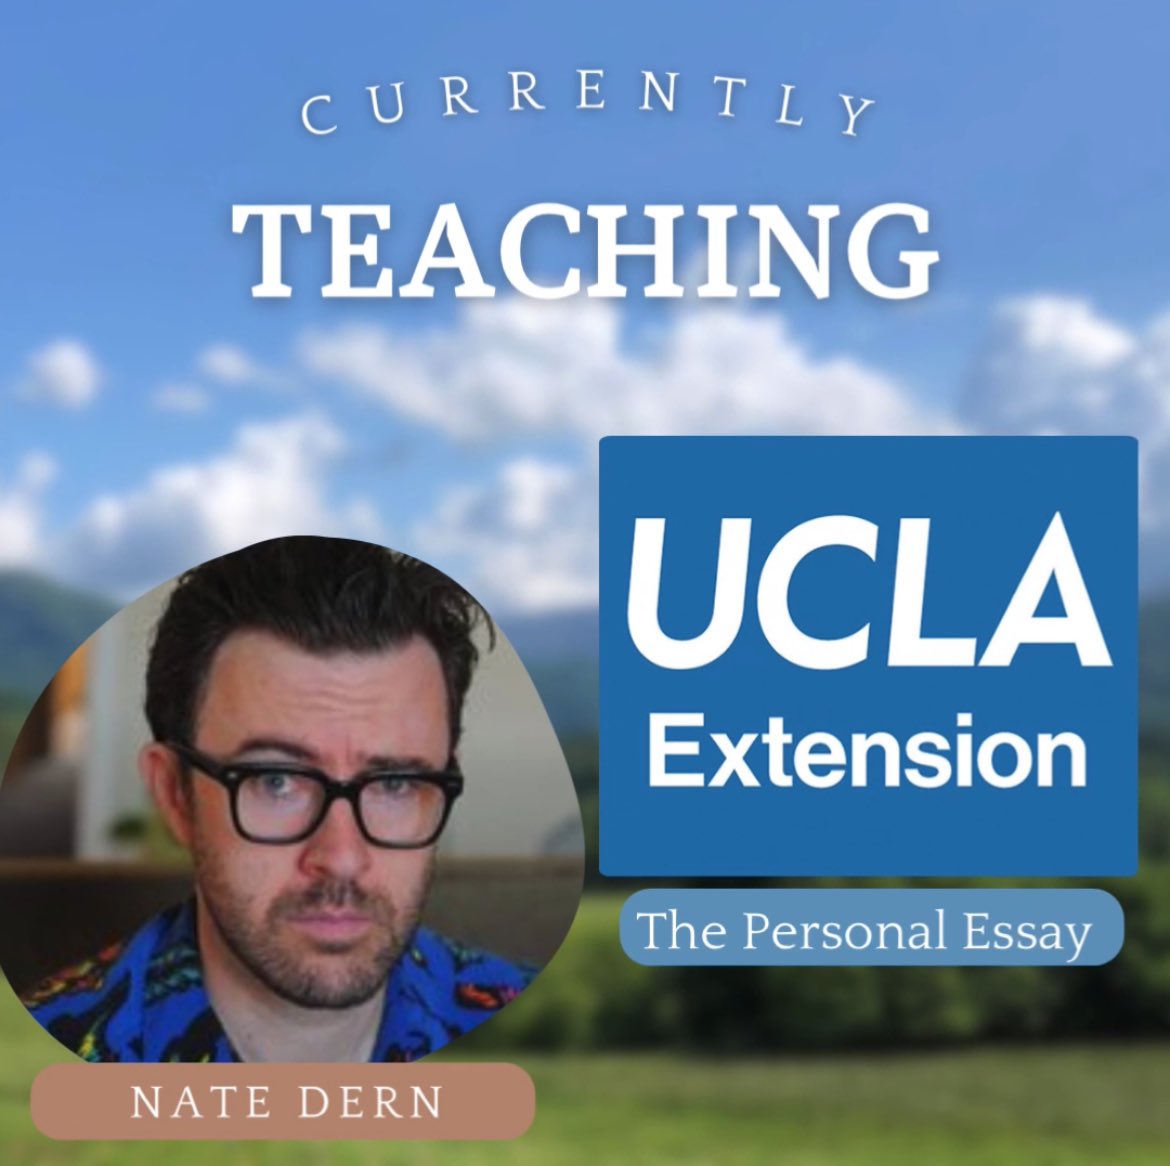 MFA candidate @natedern is teaching a course through @uclaextension on writing the Personal Essay. Sign up here: 

uclaextension.edu/writing-journa…

#wwcmfa #uclaextensionschool #personalessay